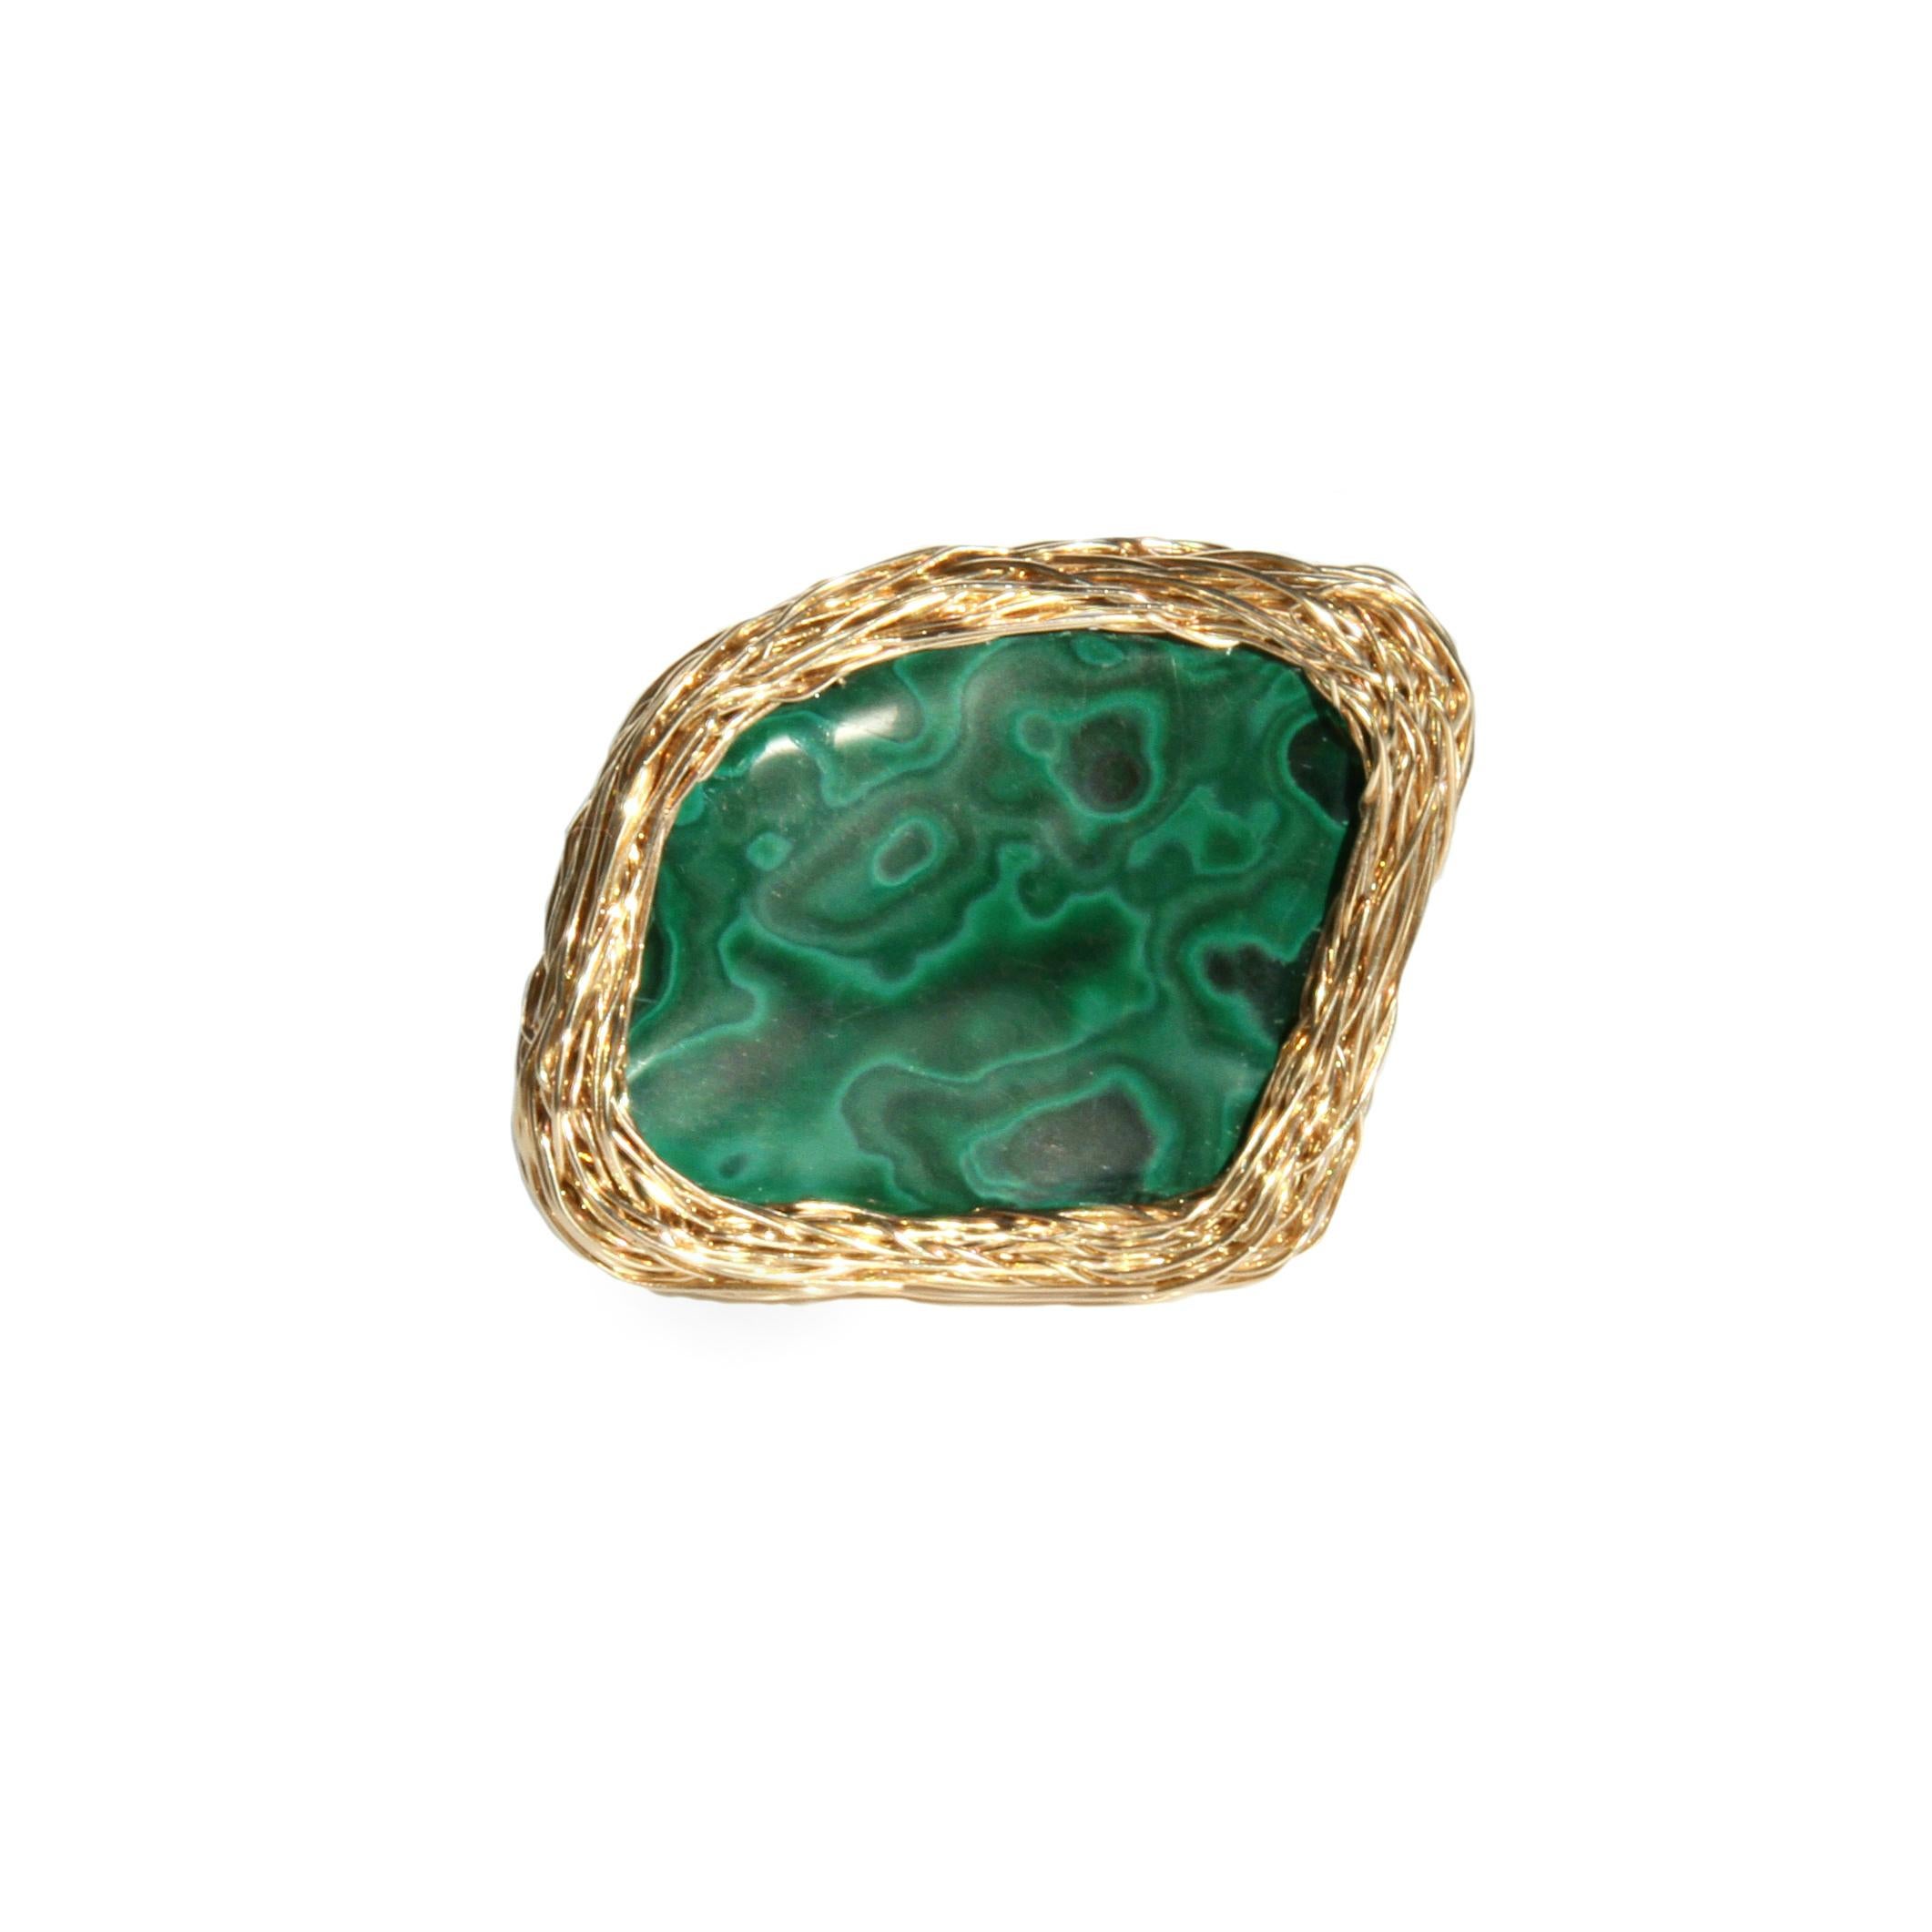 Contemporary Greenest Gold and Malachite Statement Cocktail Ring by Sheila Westera London